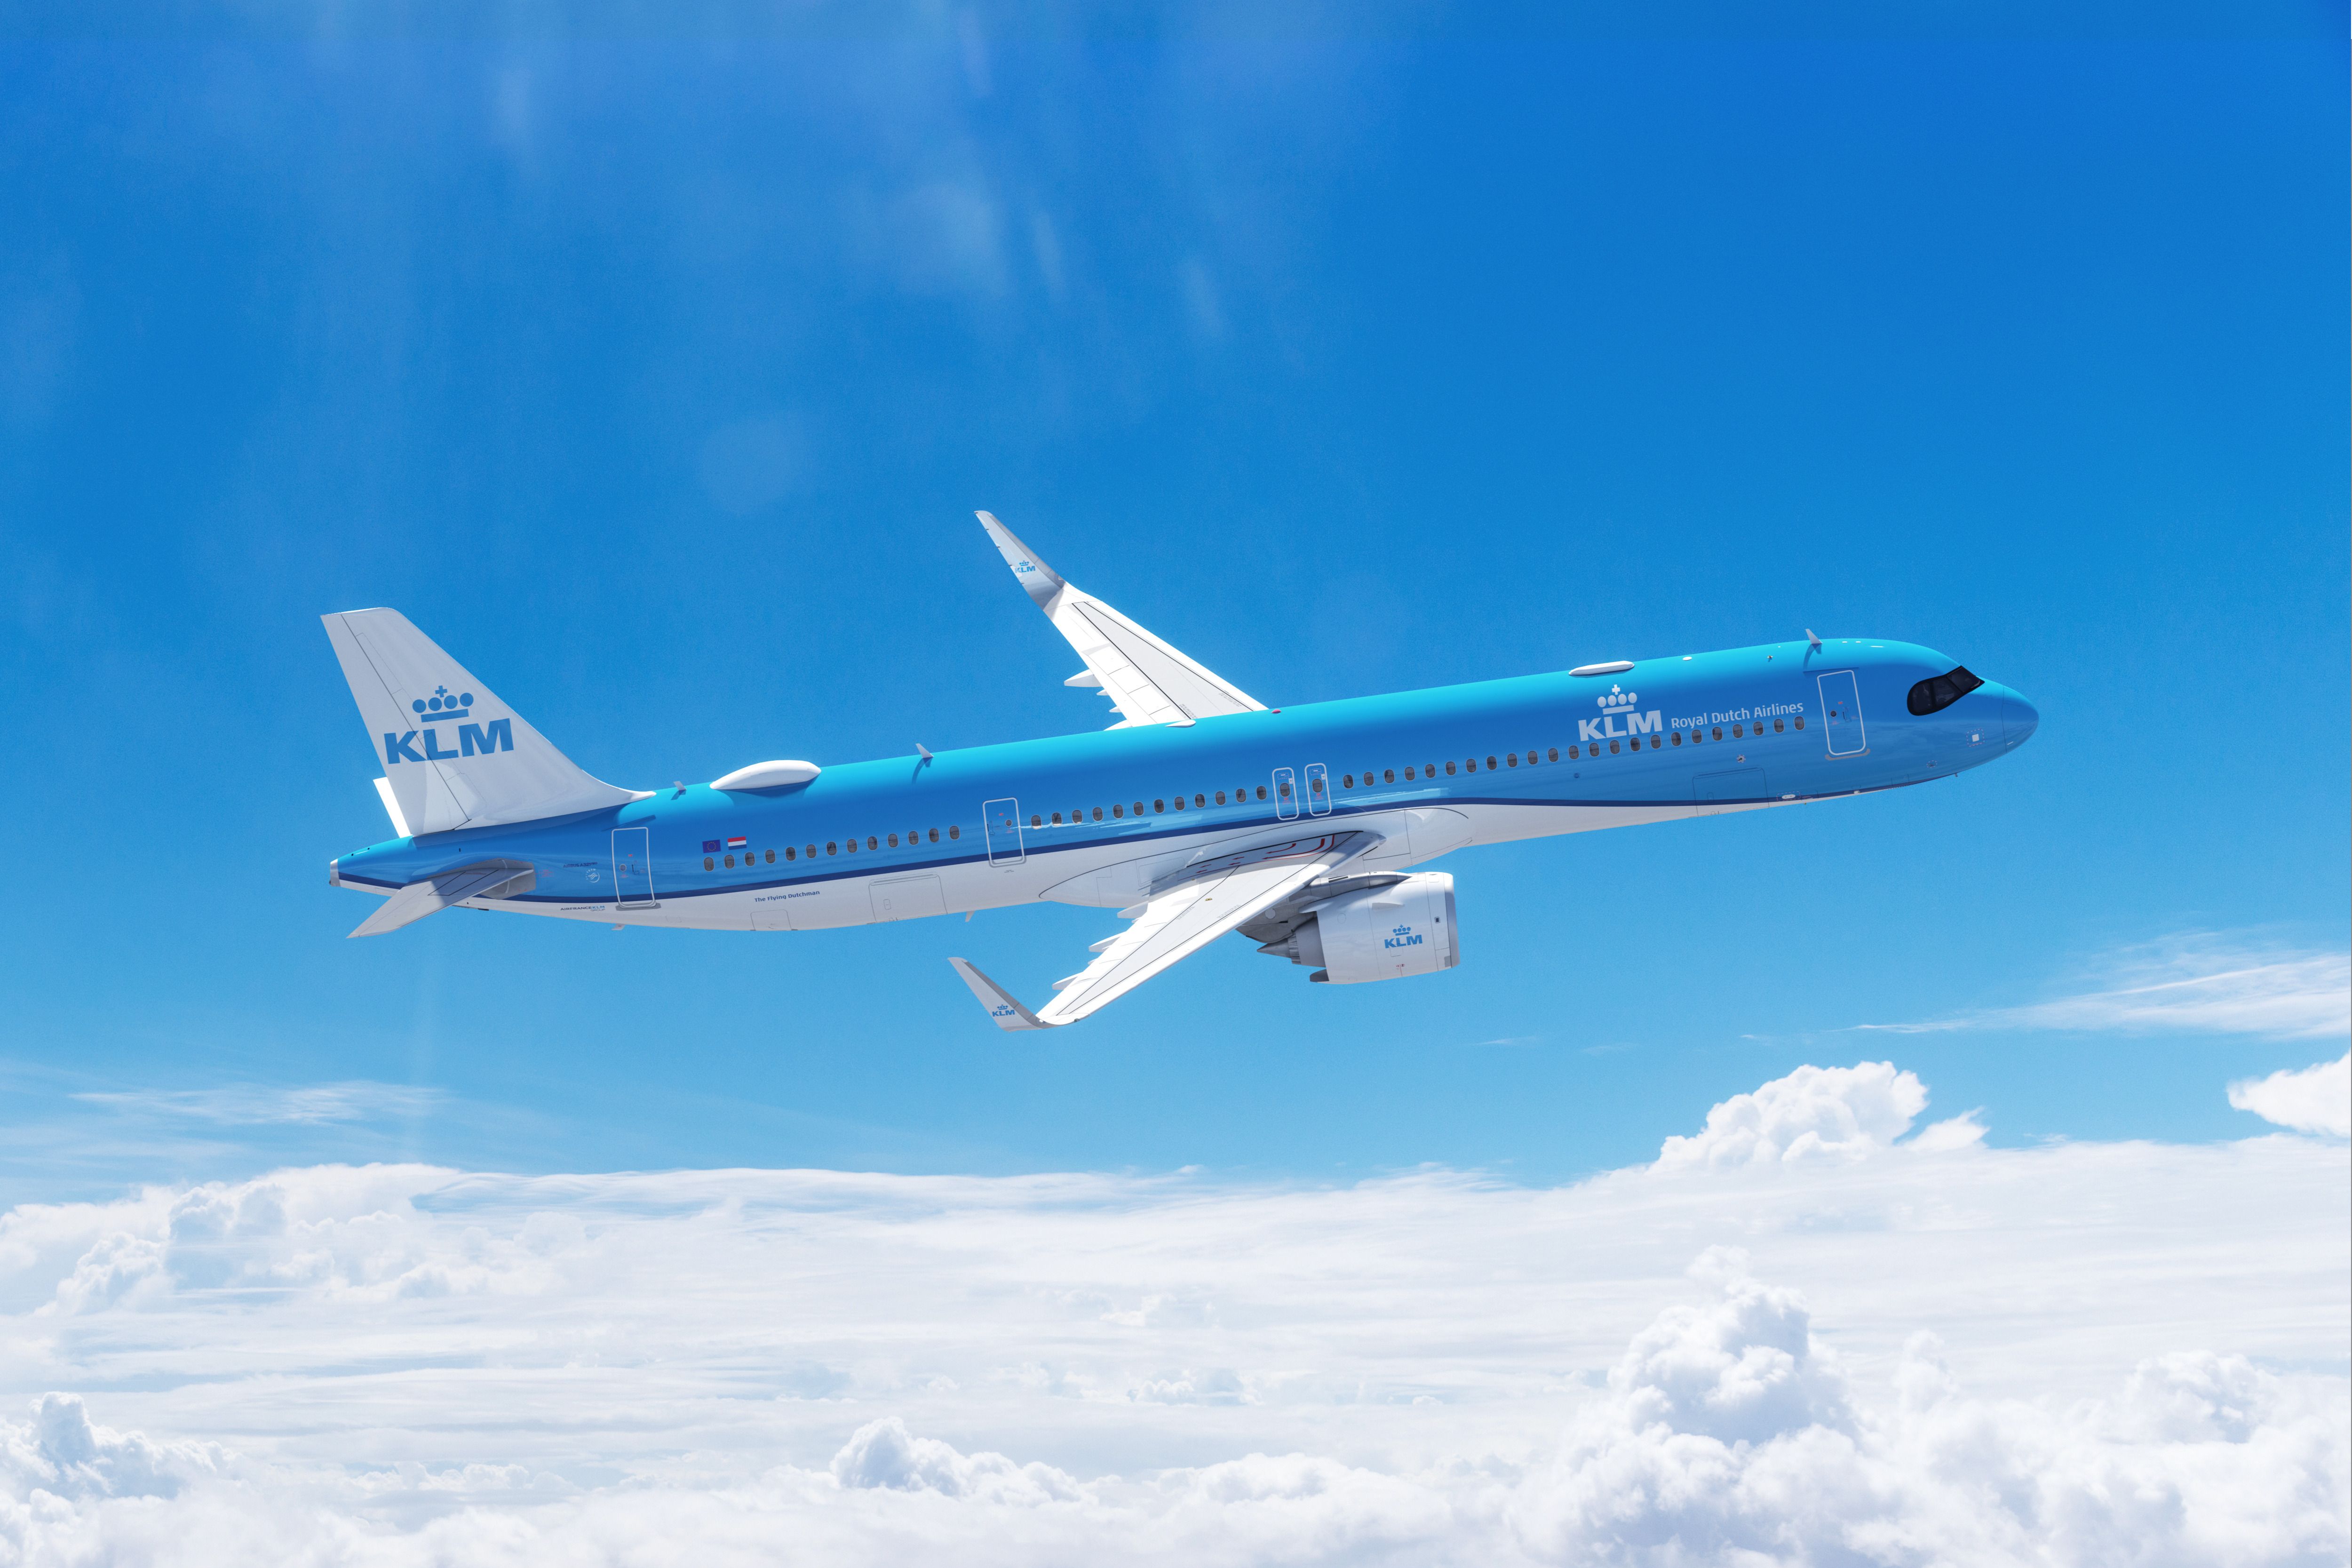 KLM's new Airbus A321neo livery